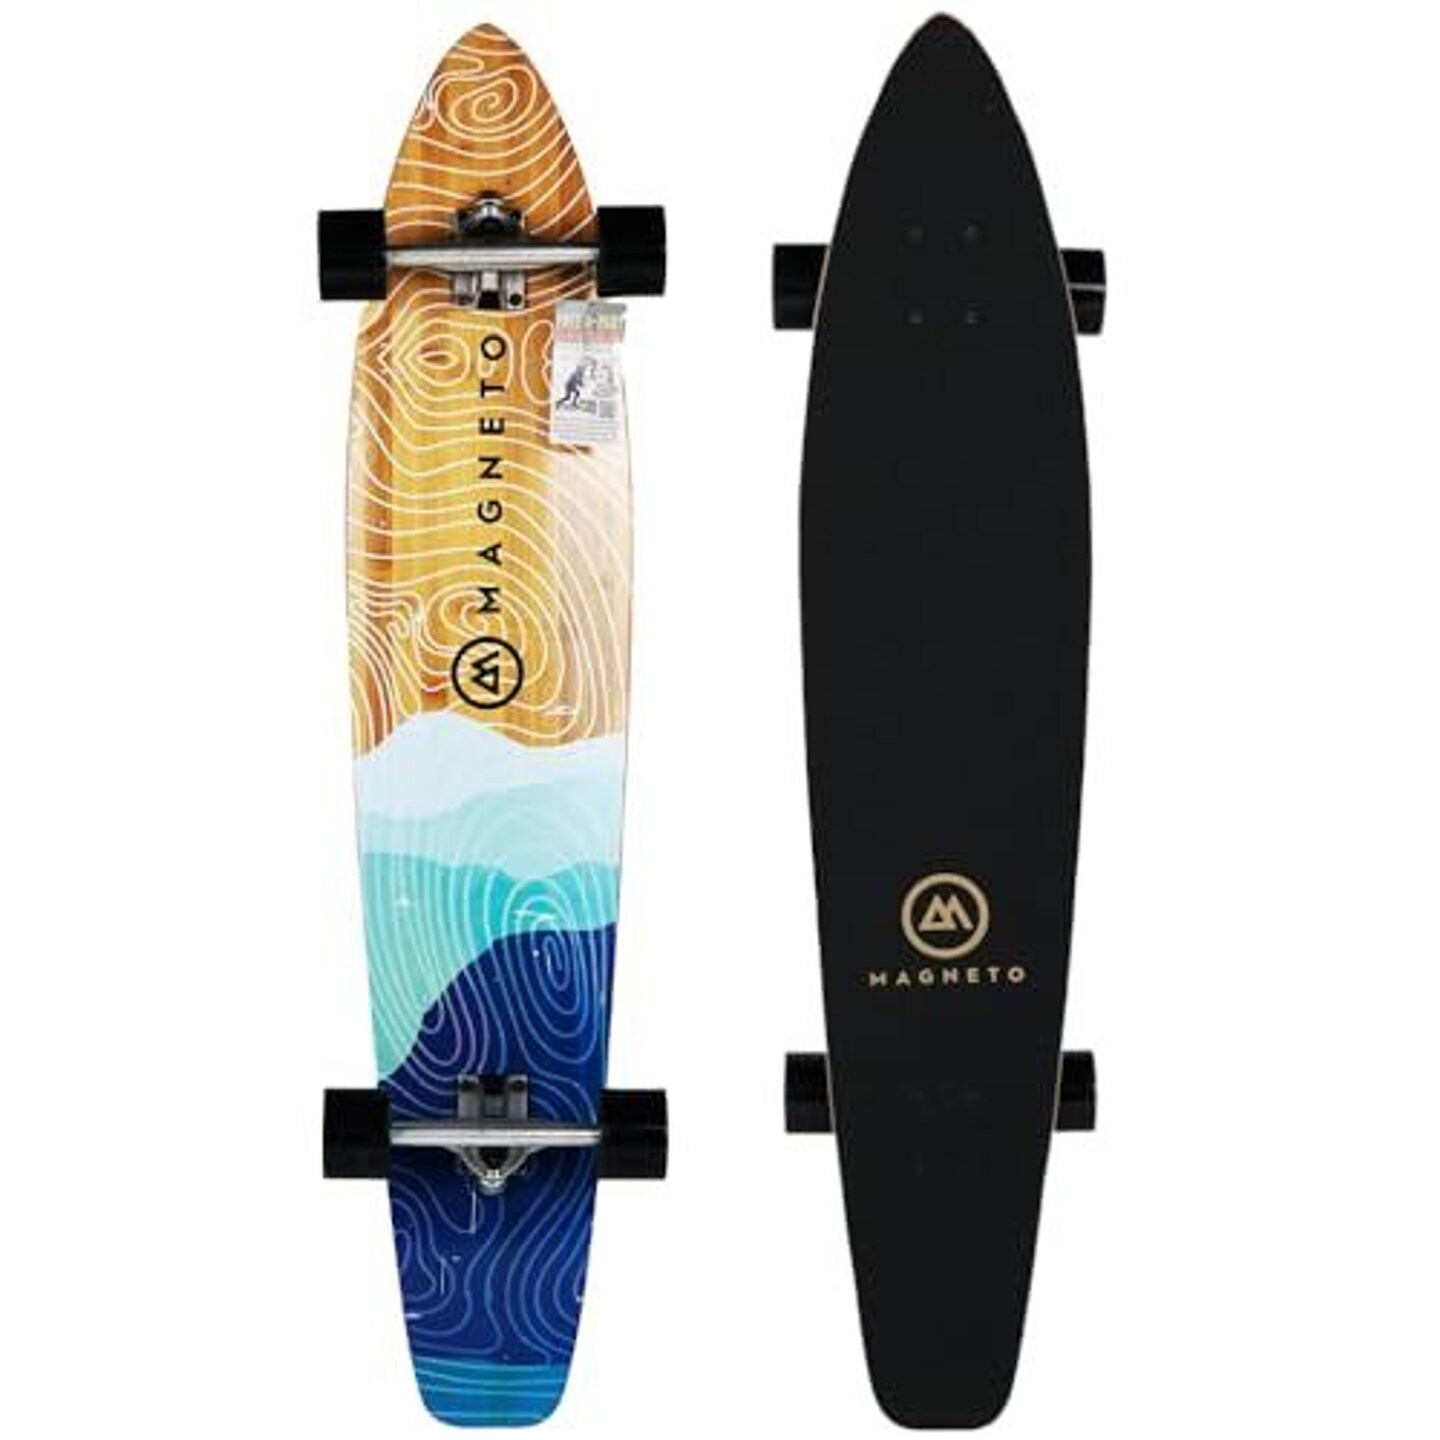 Magneto 44 inch Kicktail Cruiser Longboard Skateboard | Bamboo and Hard Maple Deck | Made for Adults, Teens, and Kids (Mountains)